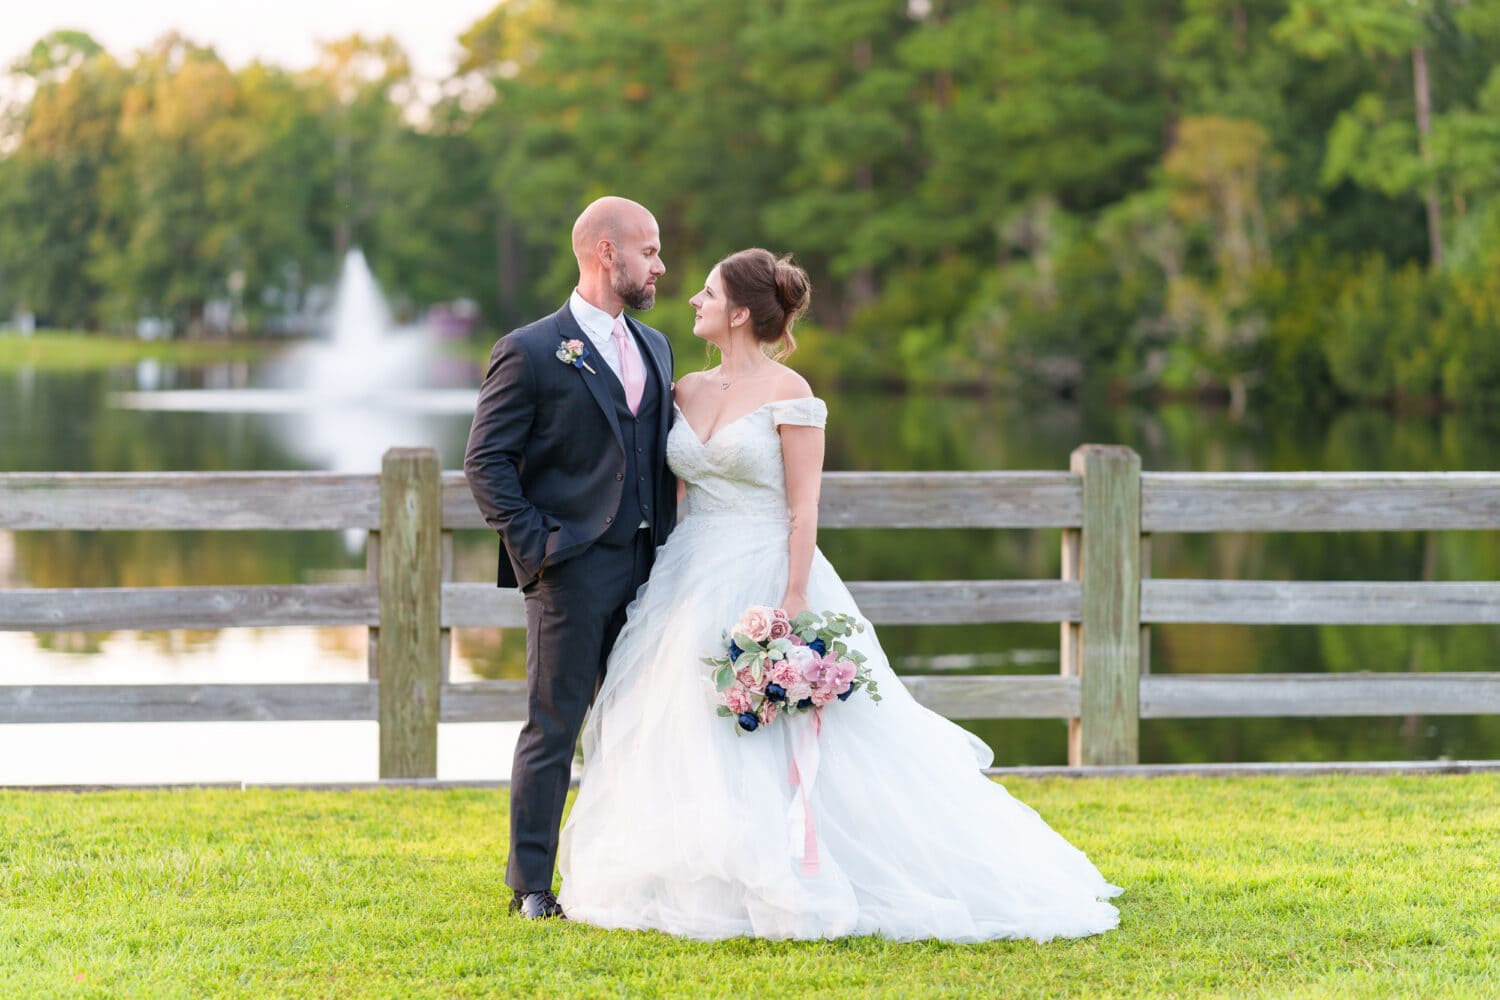 Sunset portraits with bride and groom in front of the lake and fountain - The Pavilion at Pepper Plantation